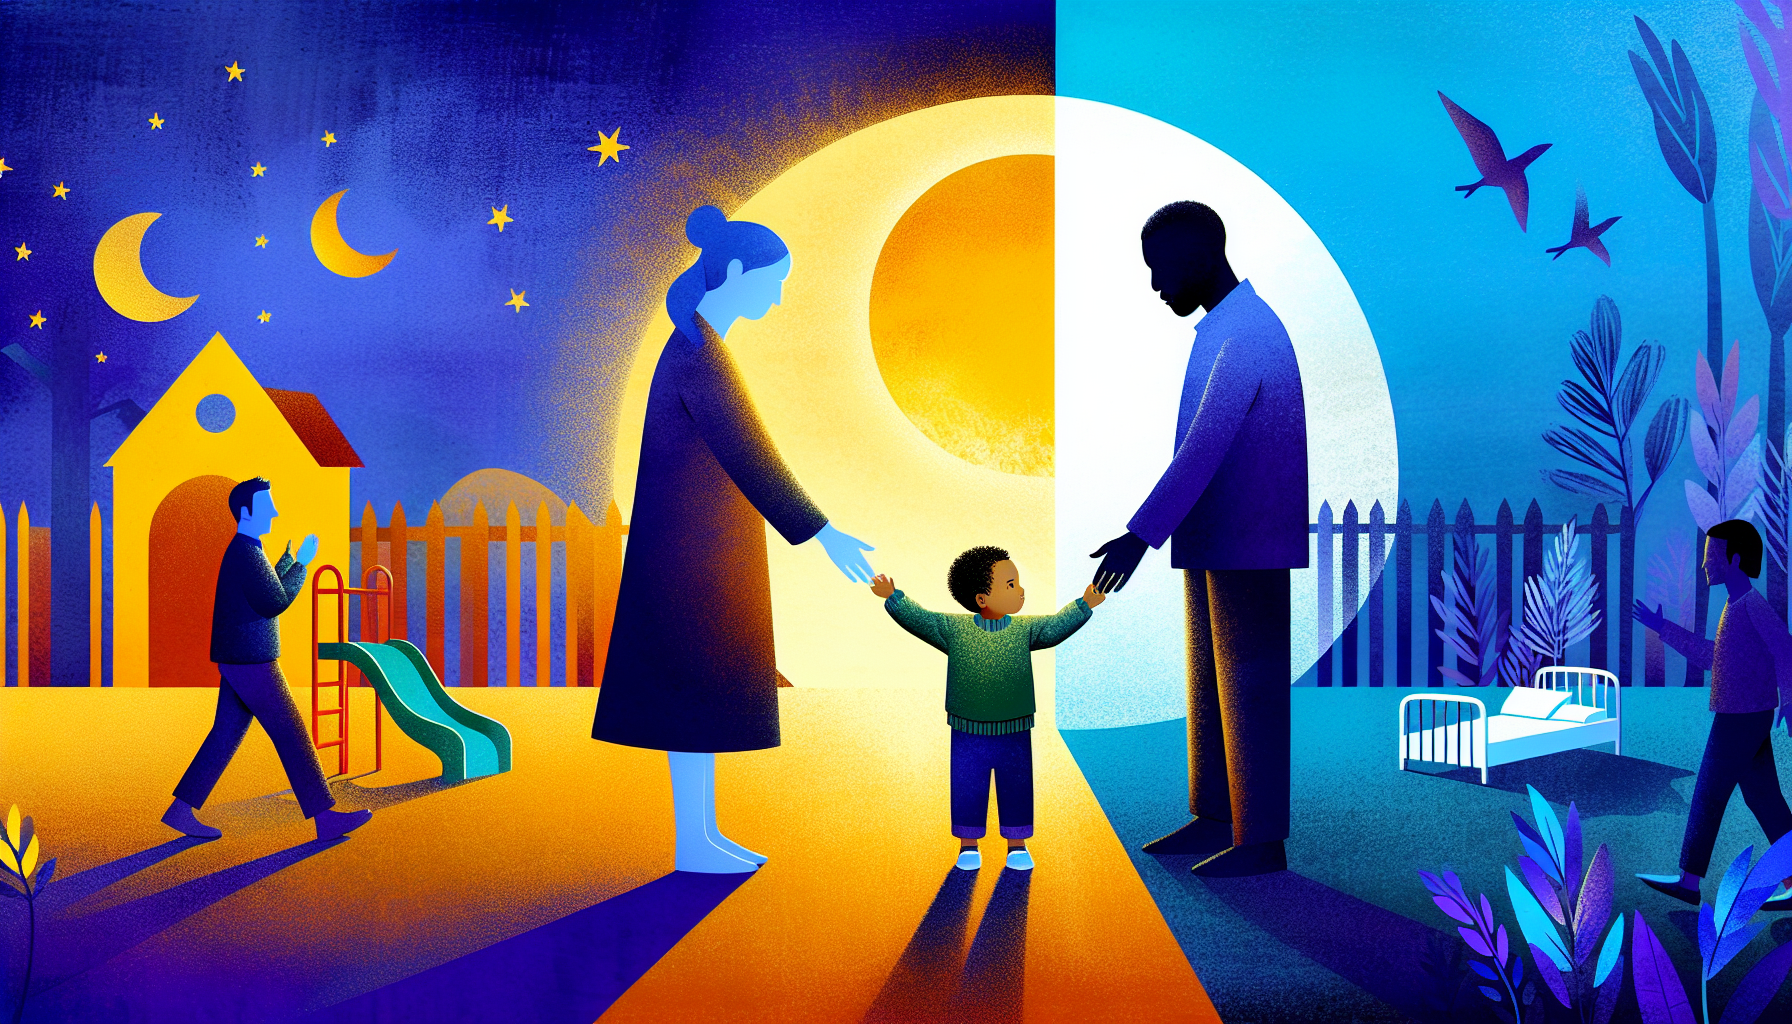 Illustration of a child with parents to represent child custody